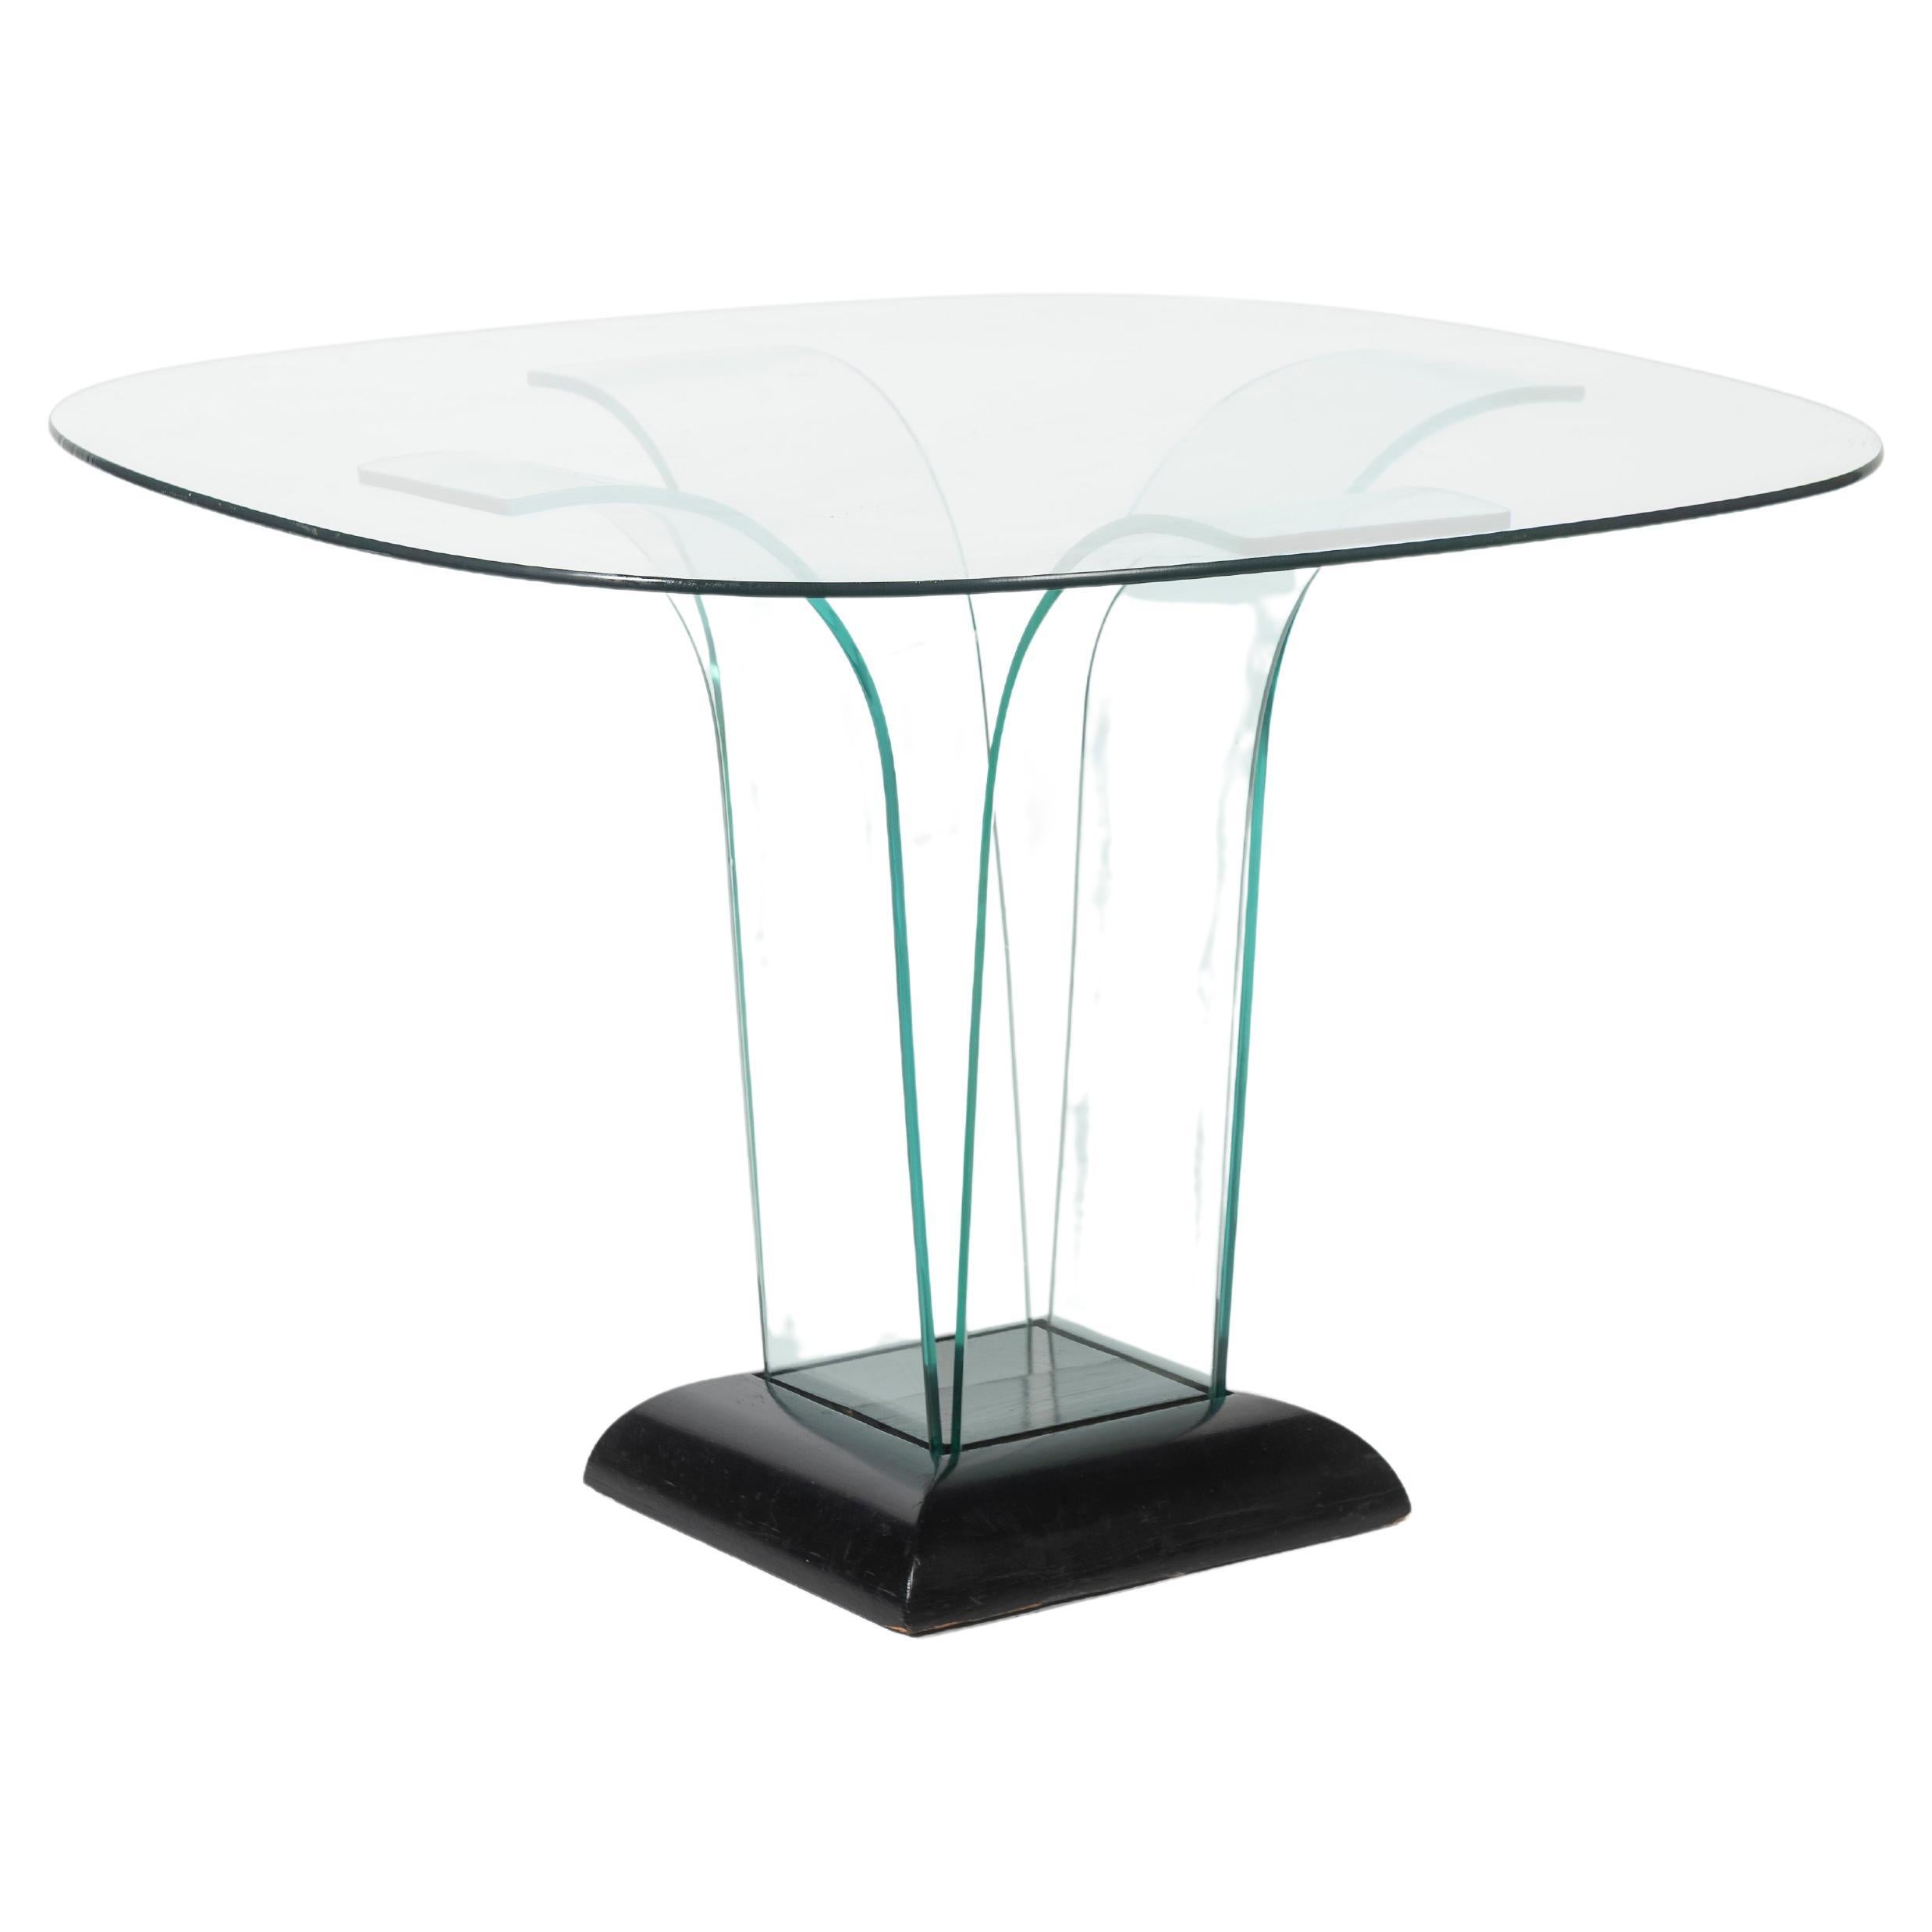 Square Sculptural Glass Center Table by Modernage